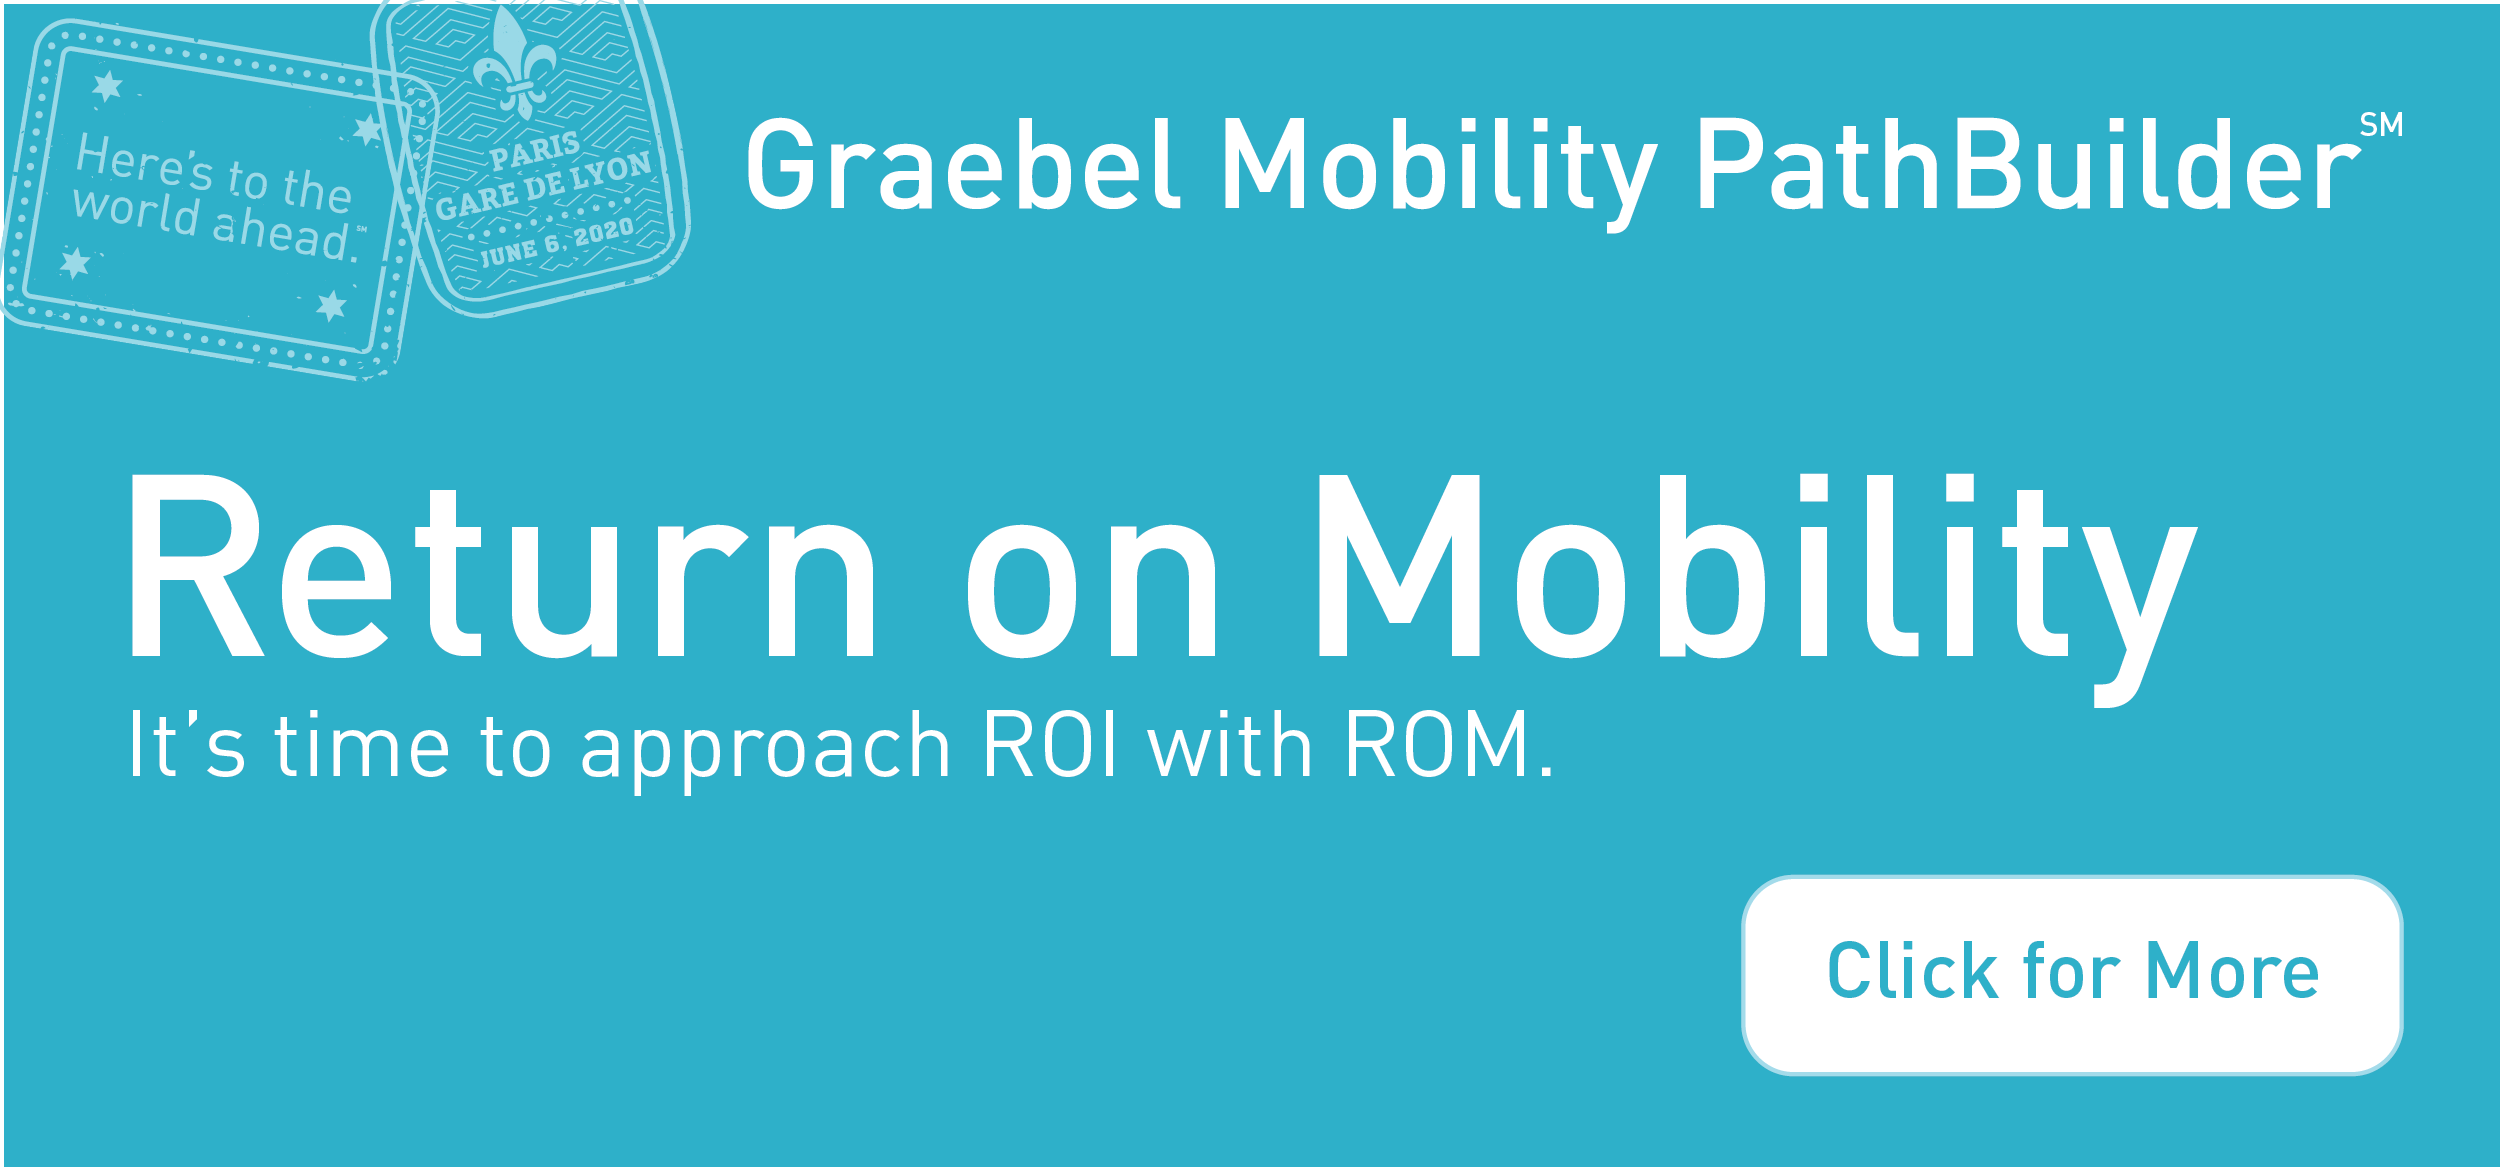 Return on Mobility - Click to learn more